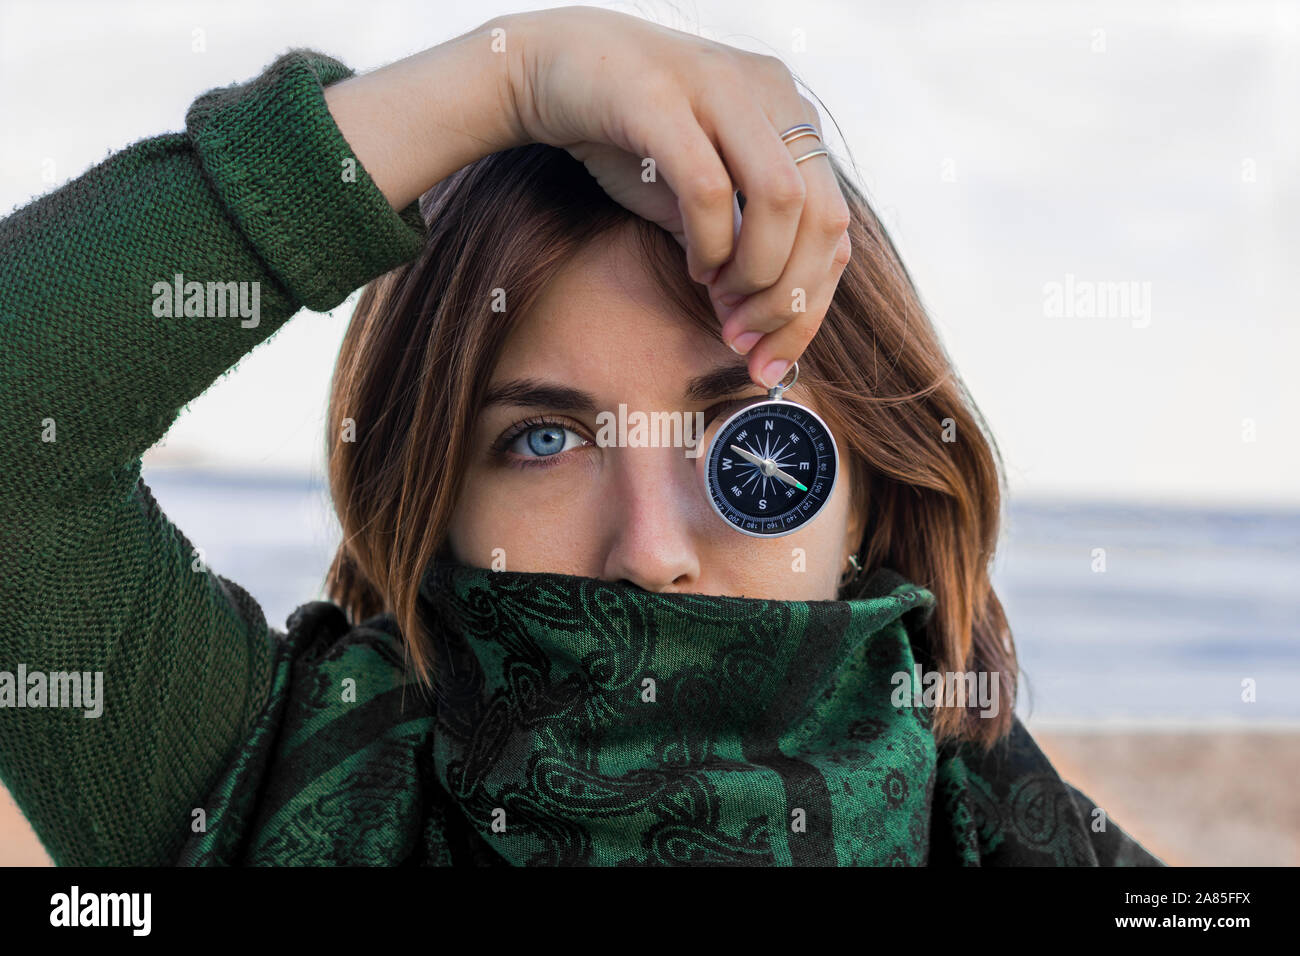 Portrait of a young woman with blue eyes. She is holding a compass Stock Photo